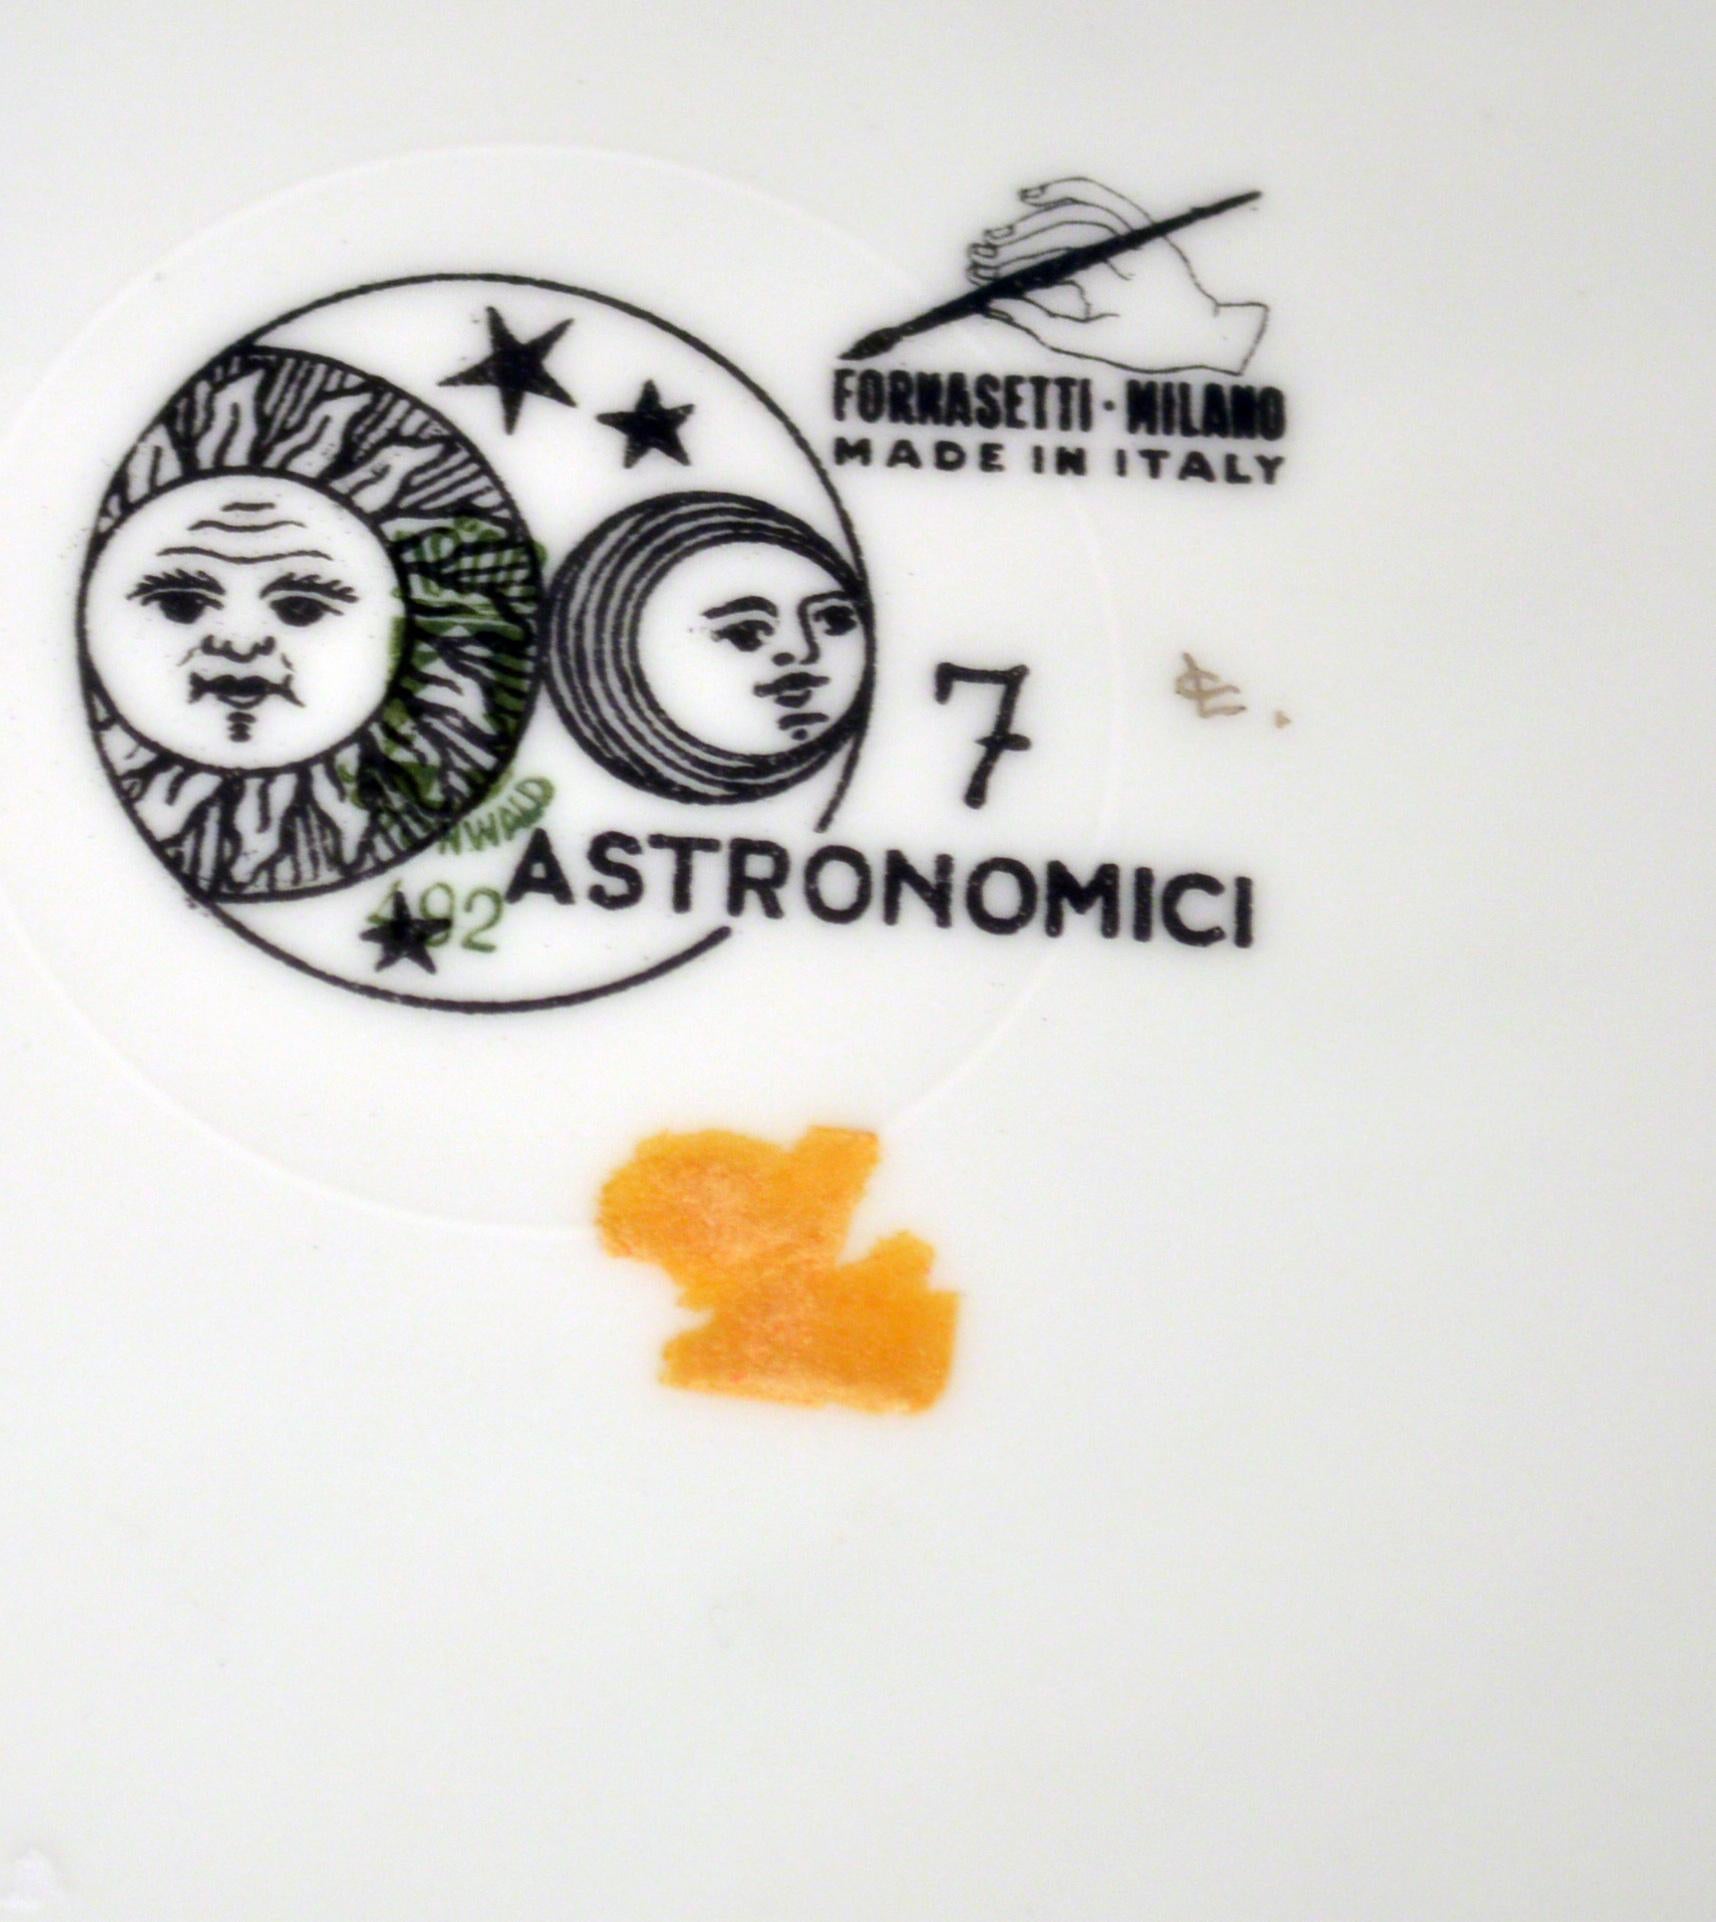 1960 Piero Fornasetti porcelain plate with number 7 in the Astronomici series.

Astronomici means 